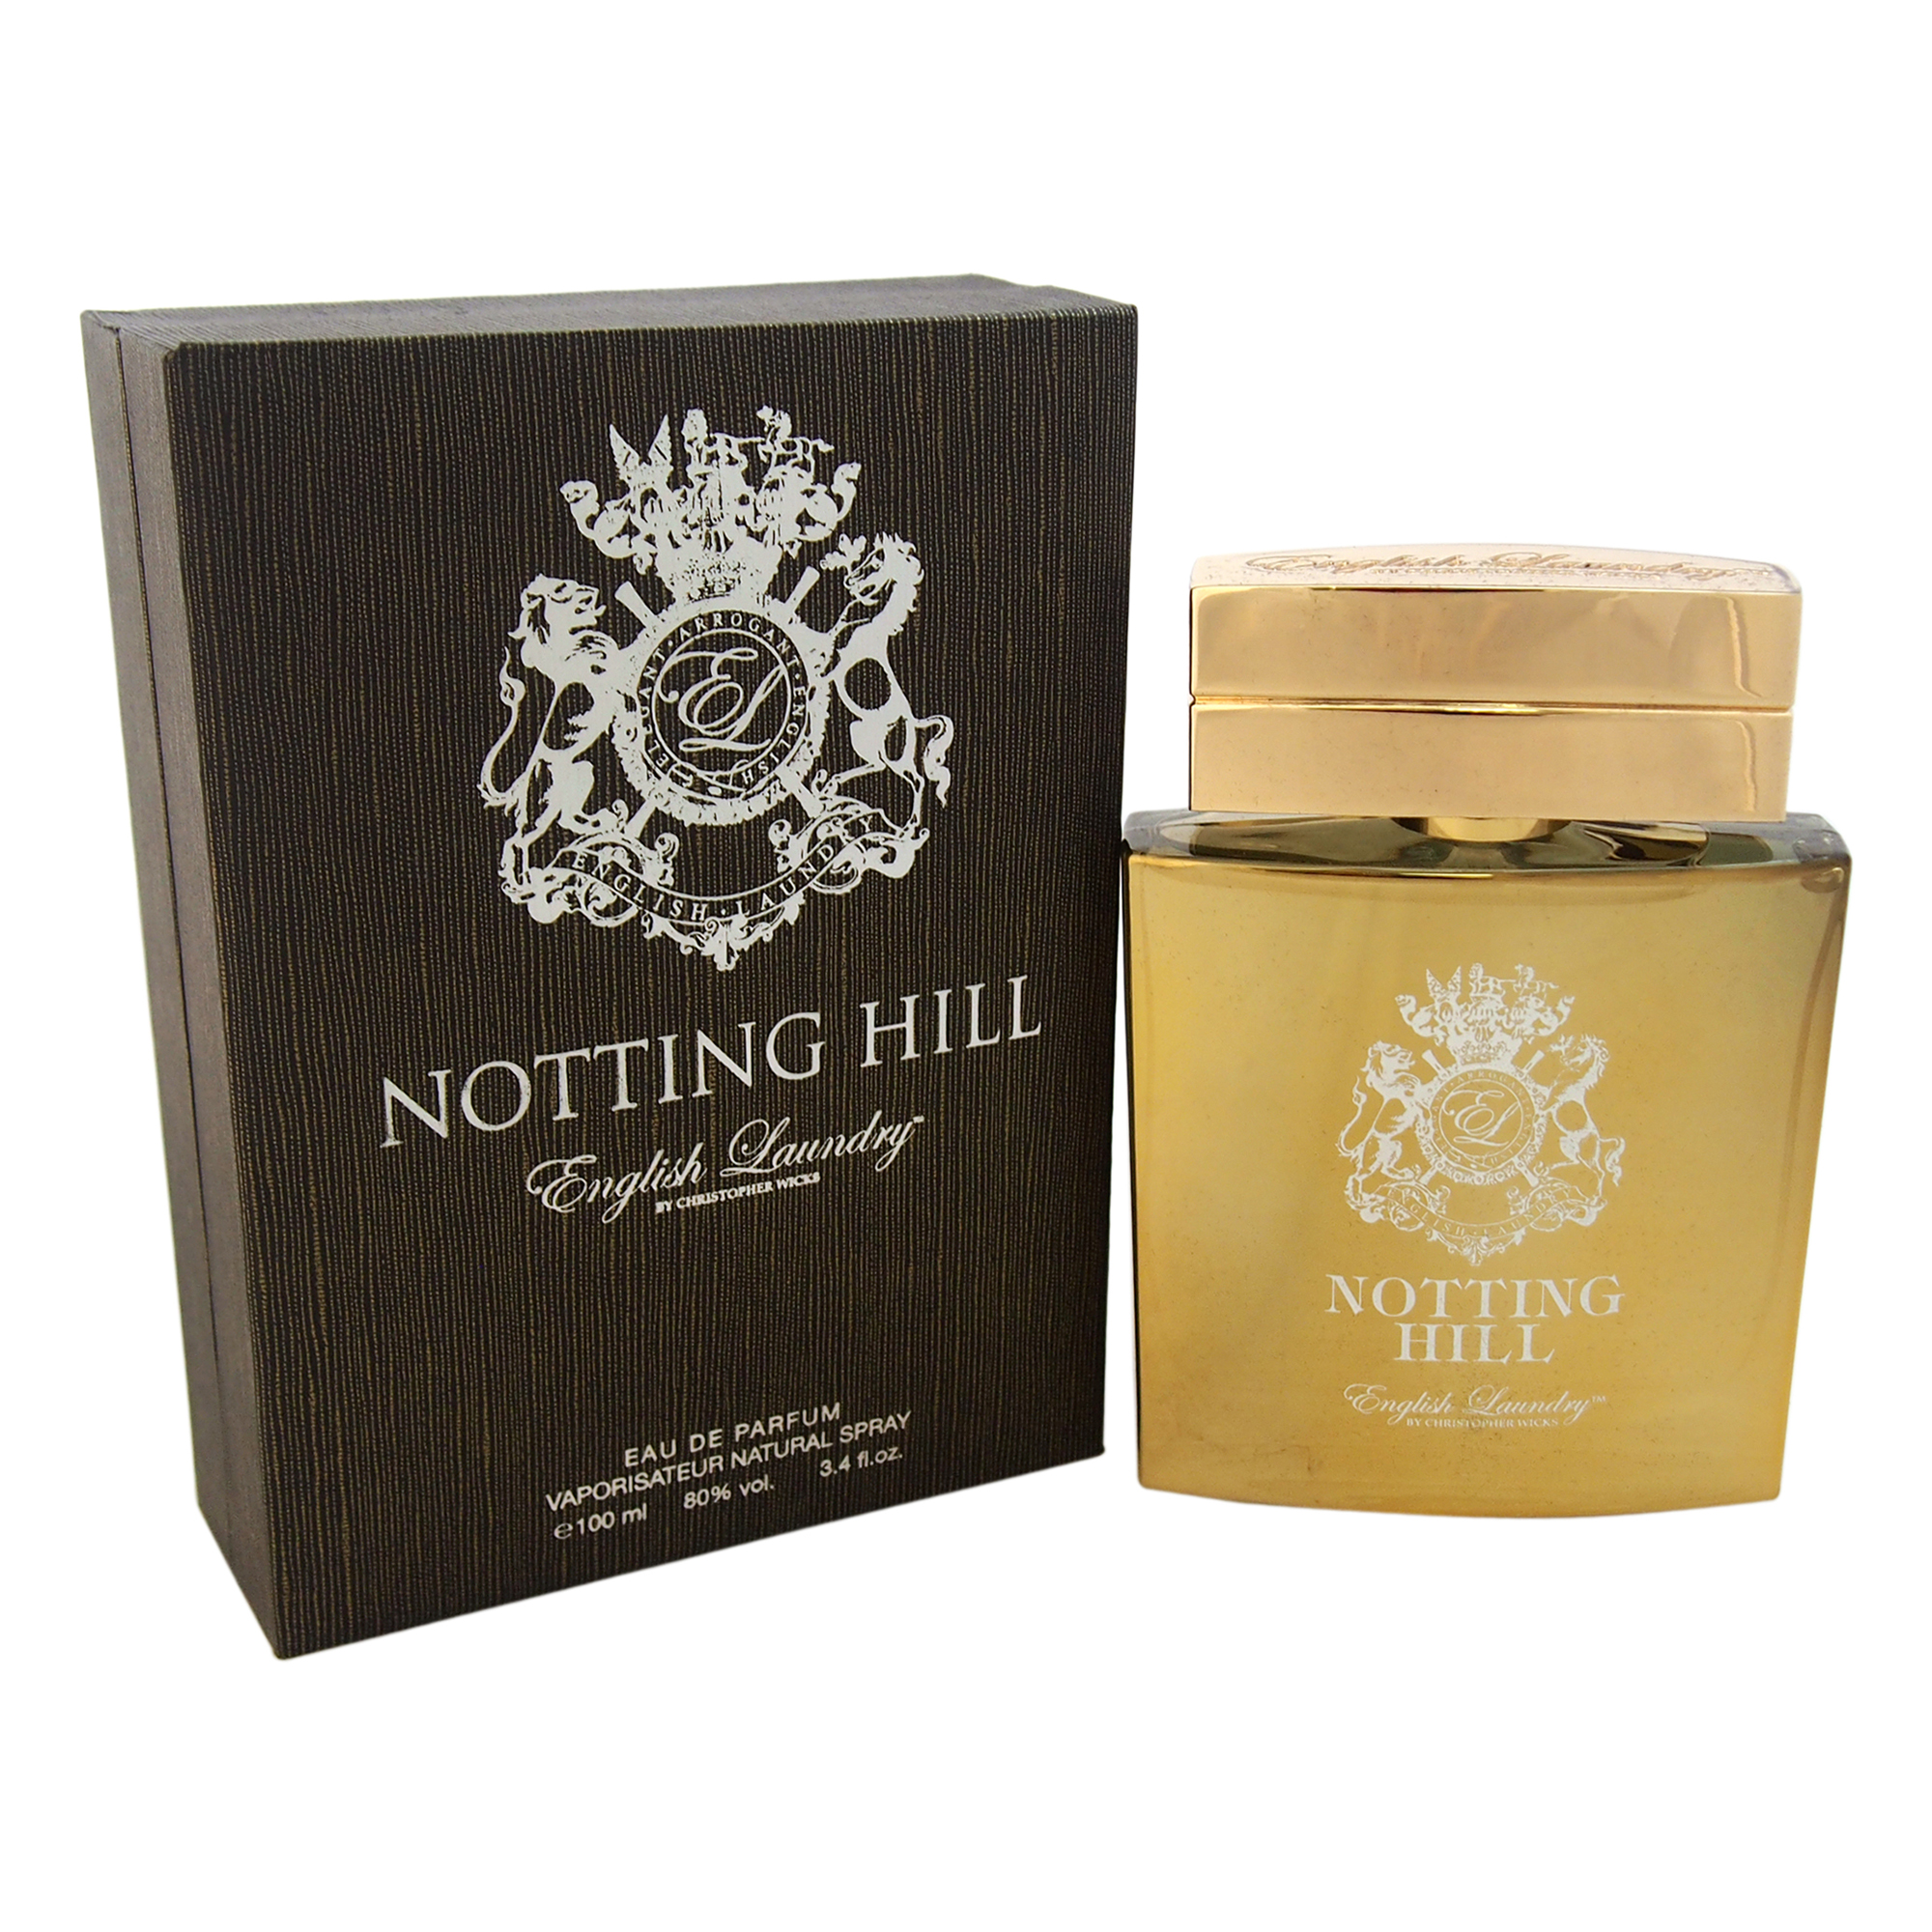 Nothing Hill by English Laundry for Men - 3.4 oz EDP Spray